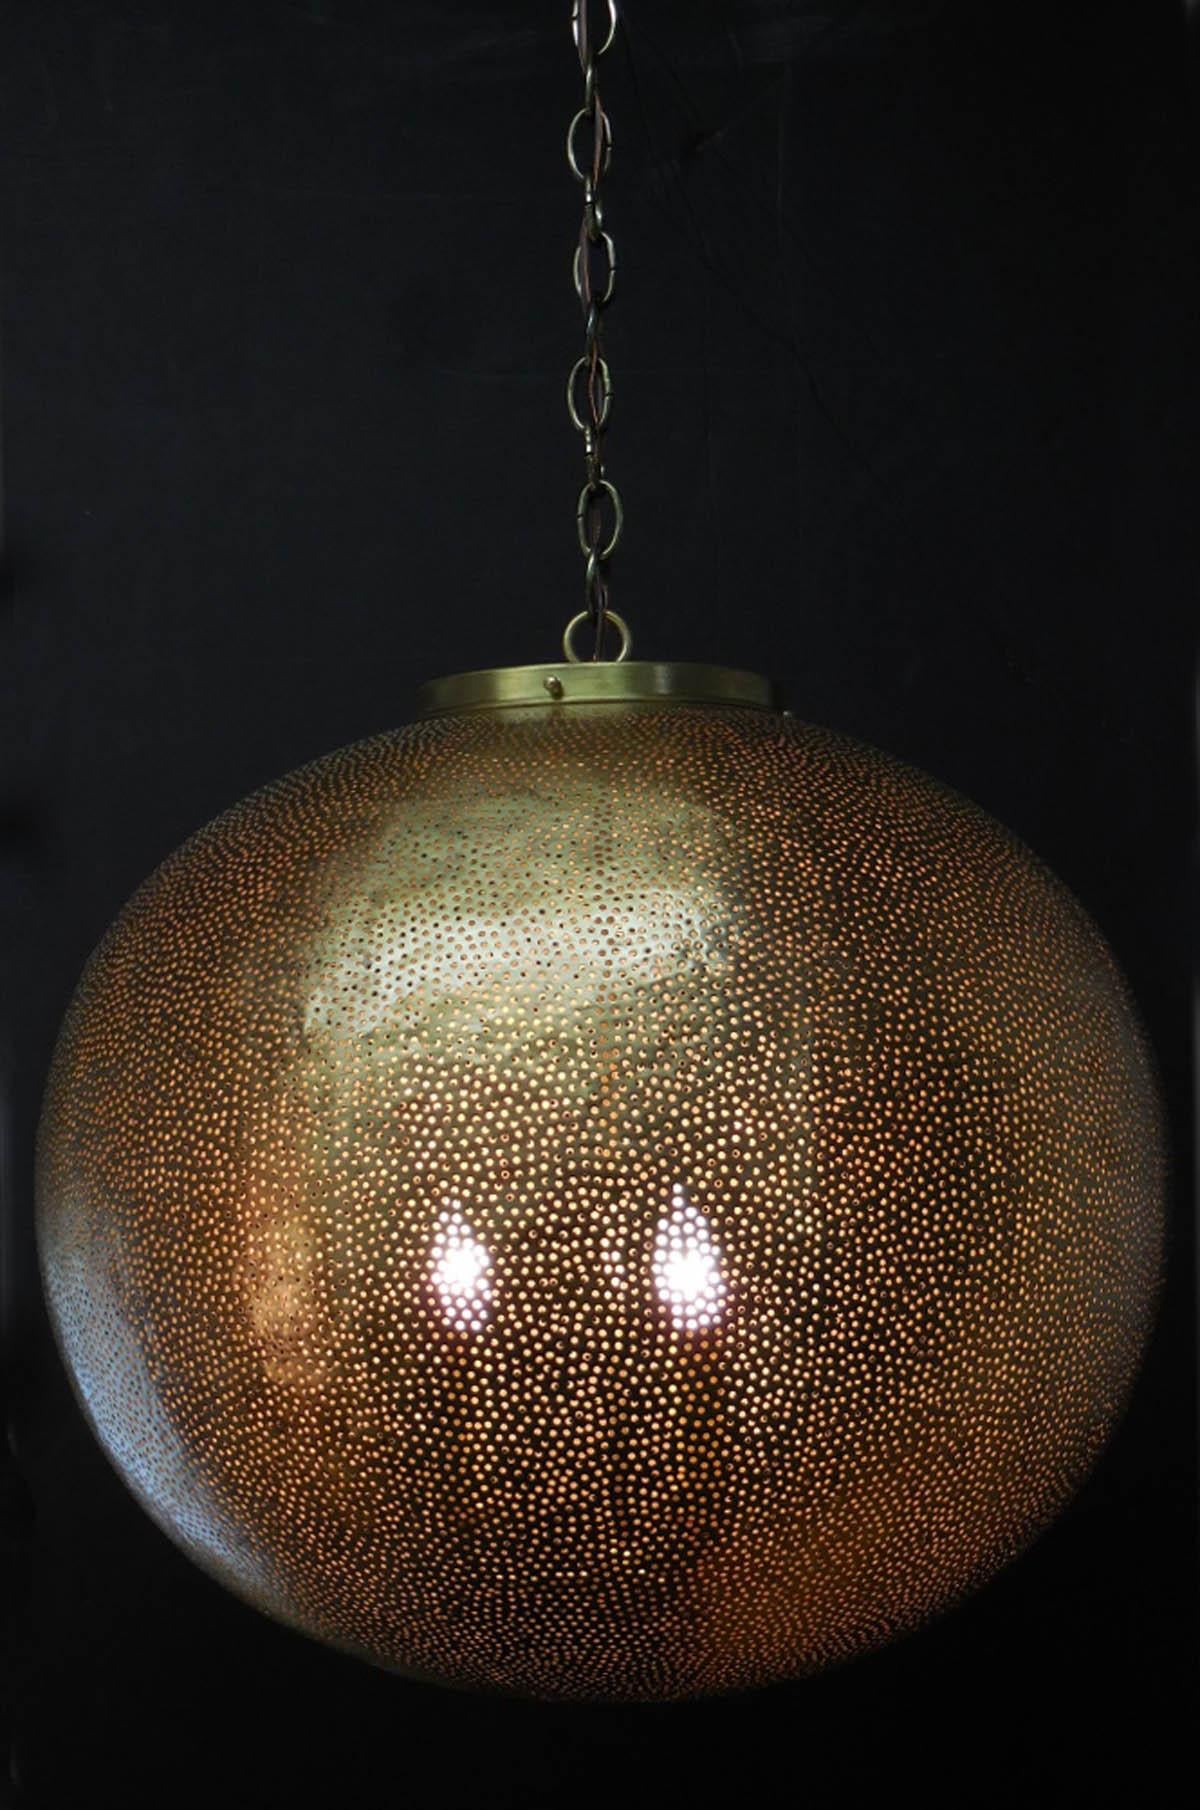 Large lantern, in hammered metal with hand finished matte bronze finish. Rewired in the US. Tiny circular cut outs. Three interior lights. Comes with chain in antique bronze finish. Ready for installation! 